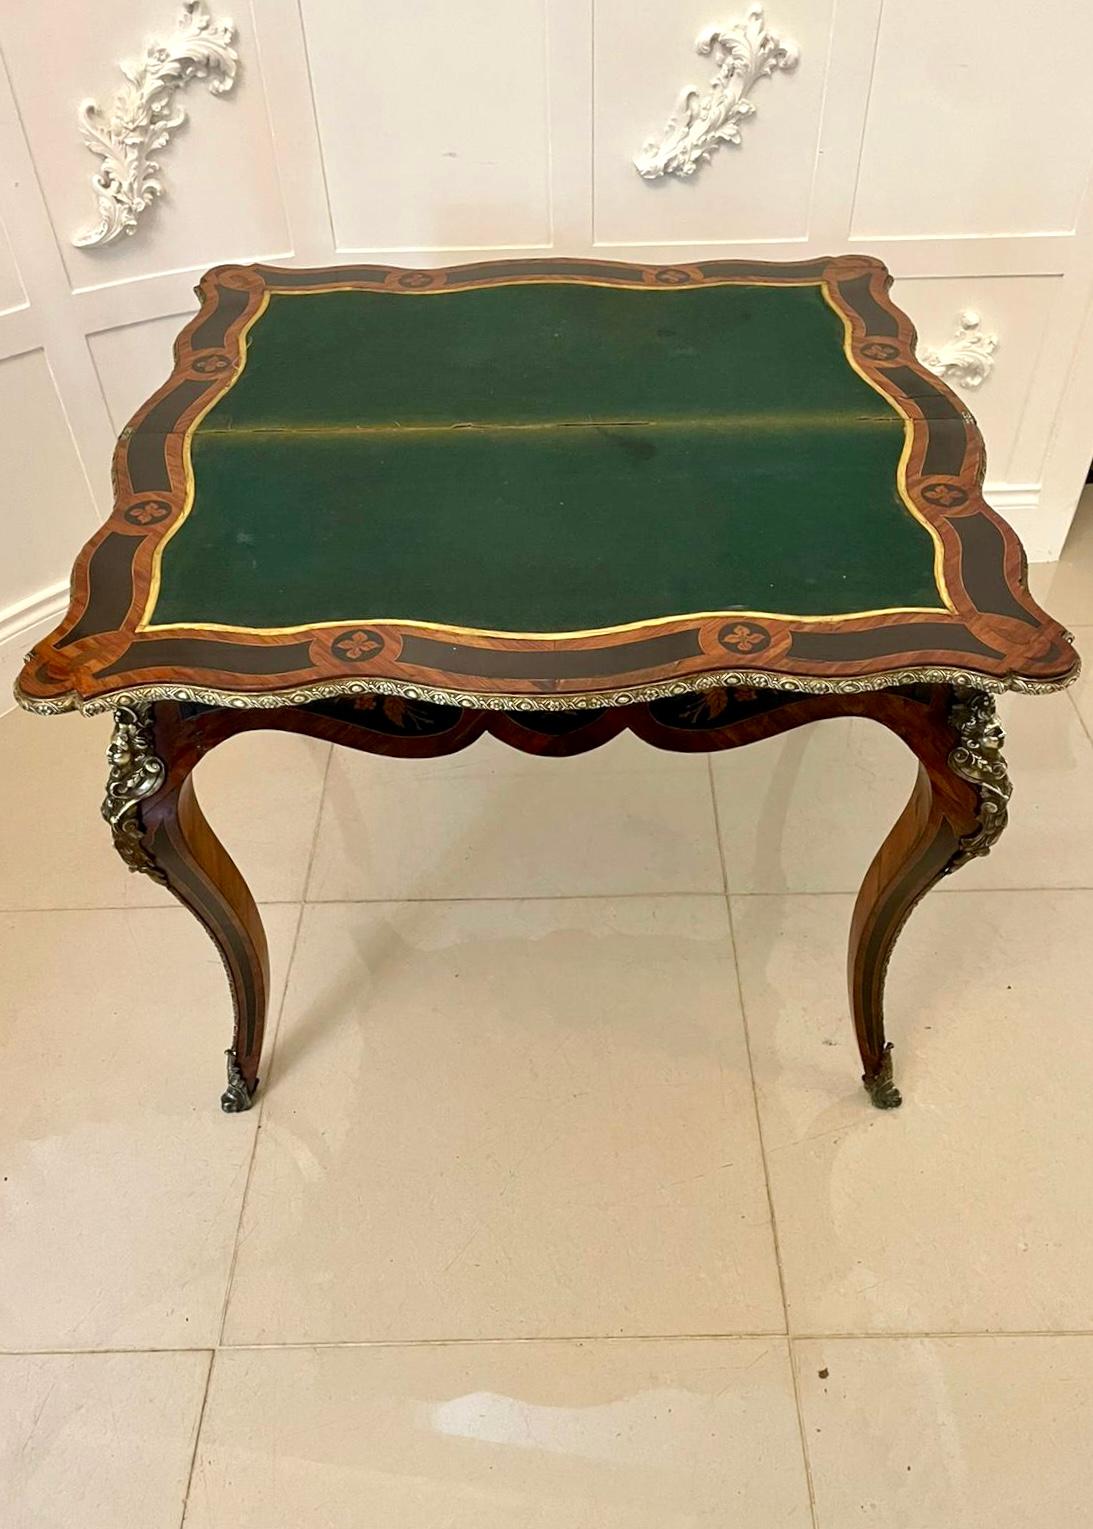 Fine Antique French Kingwood Marquetry Inlaid Ormolu Mounted Card/Side Table For Sale 6